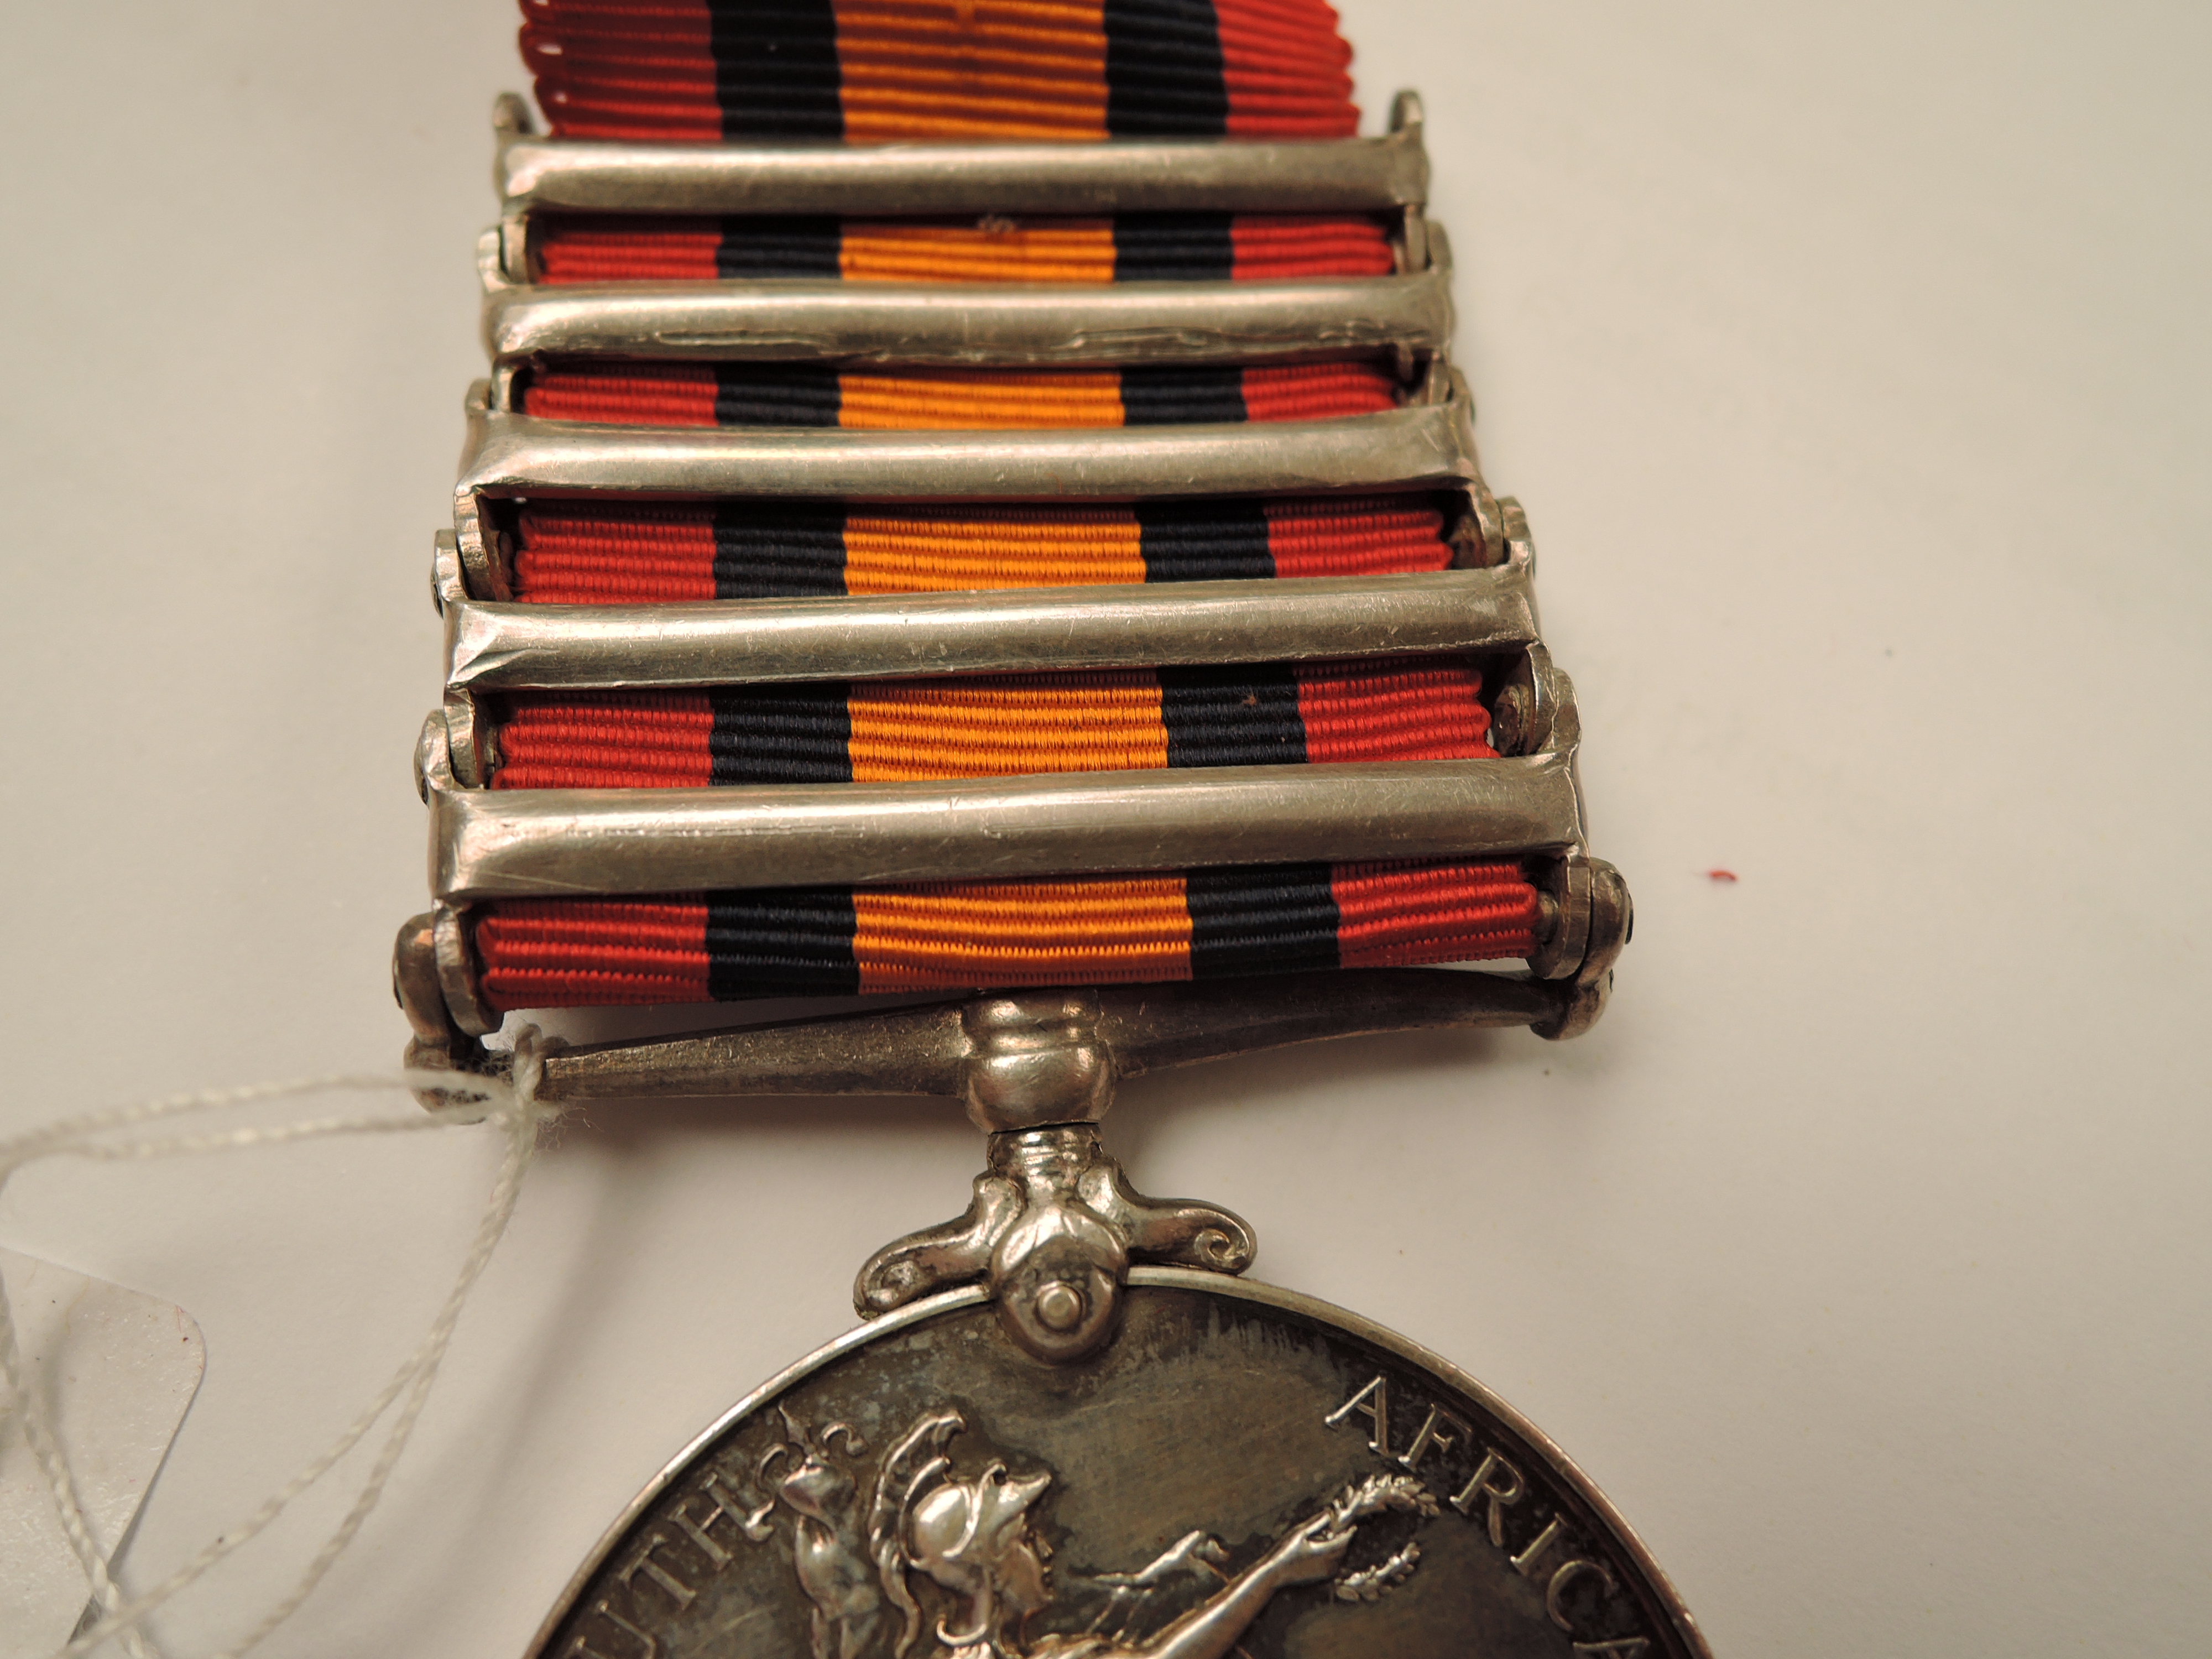 A Queen's South Africa Medal with five clasps, Cape Colony, Johannesburg, Transvaal, South Africa - Image 8 of 8